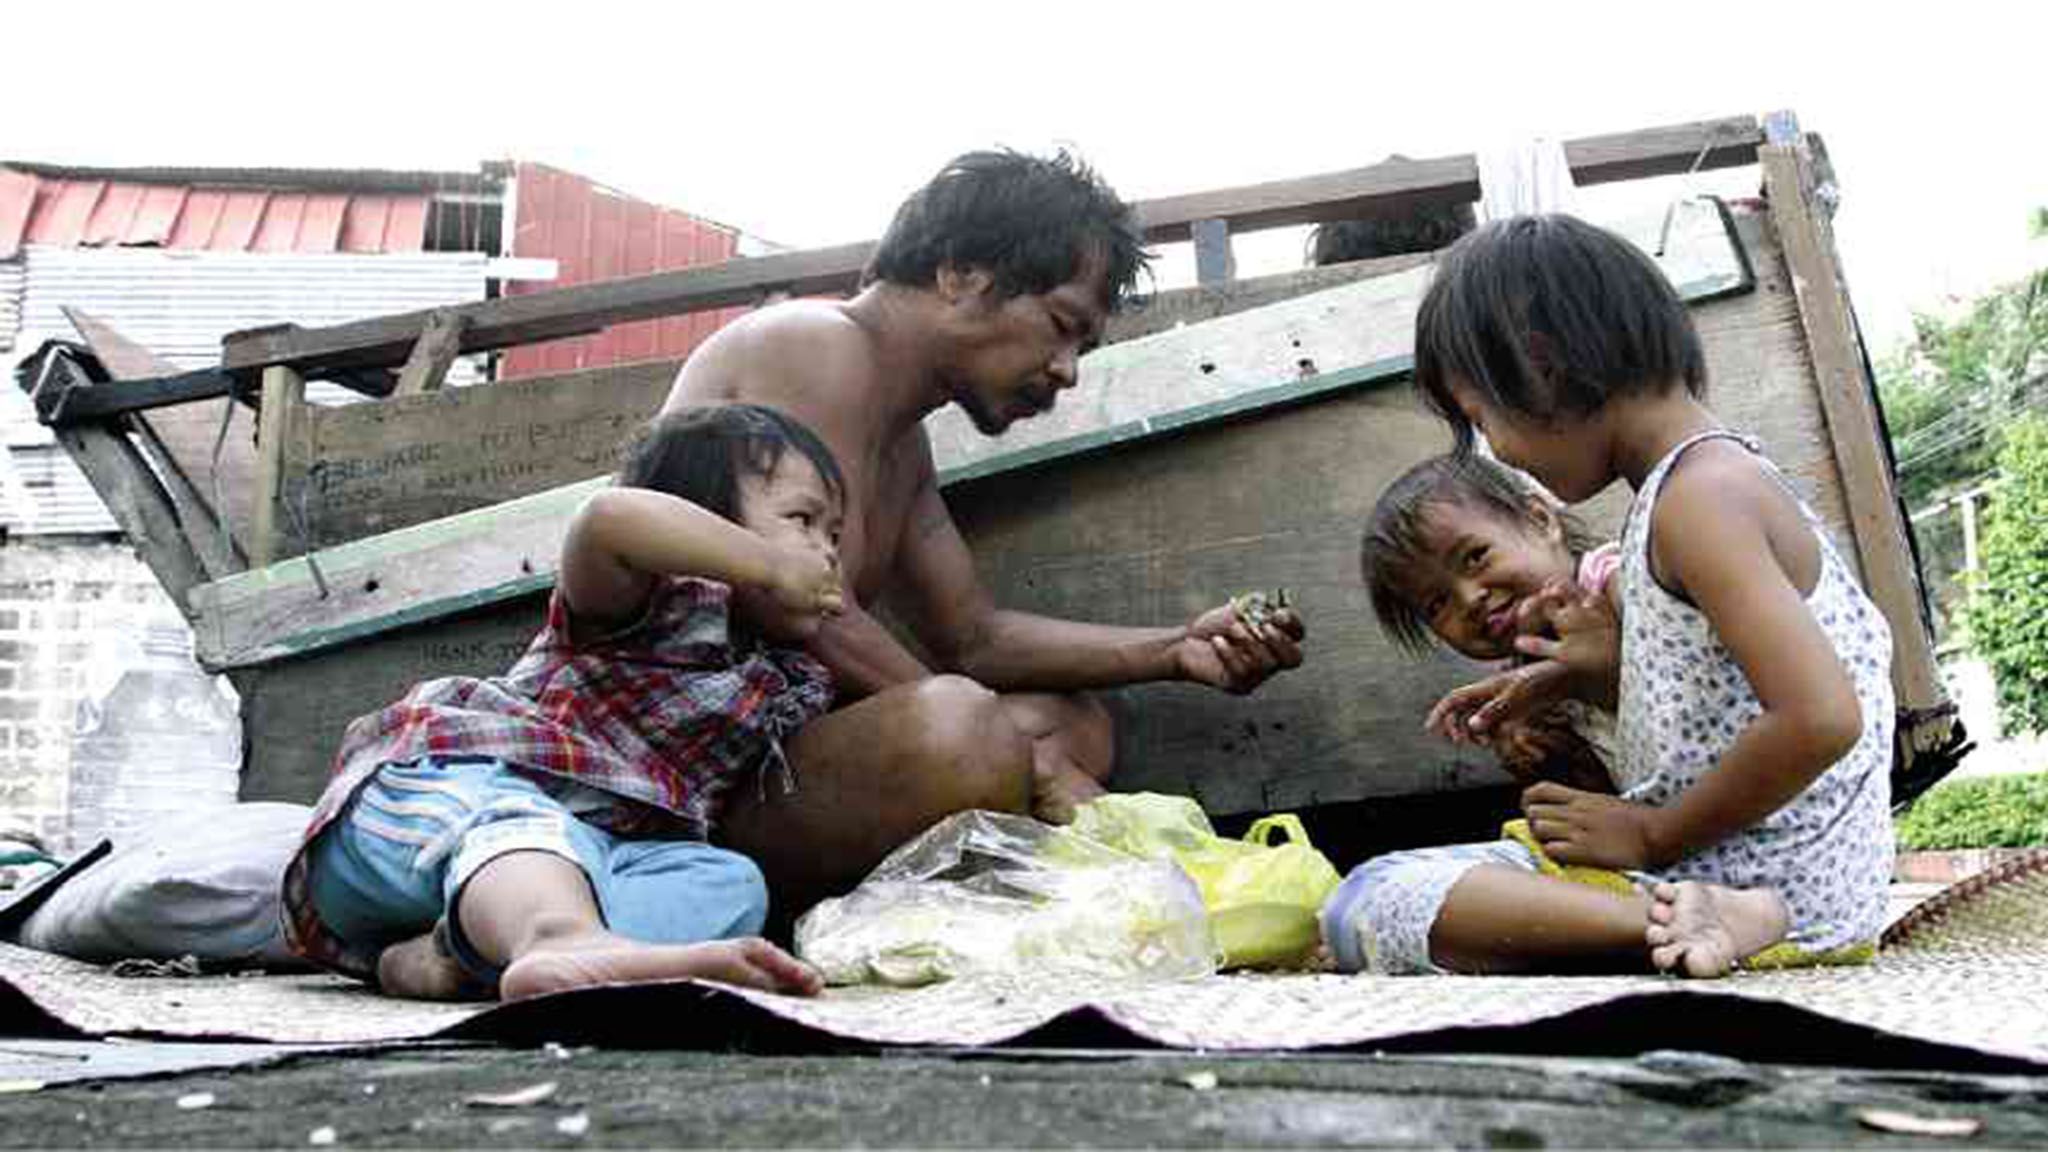 Poverty's grip on Filipino lives